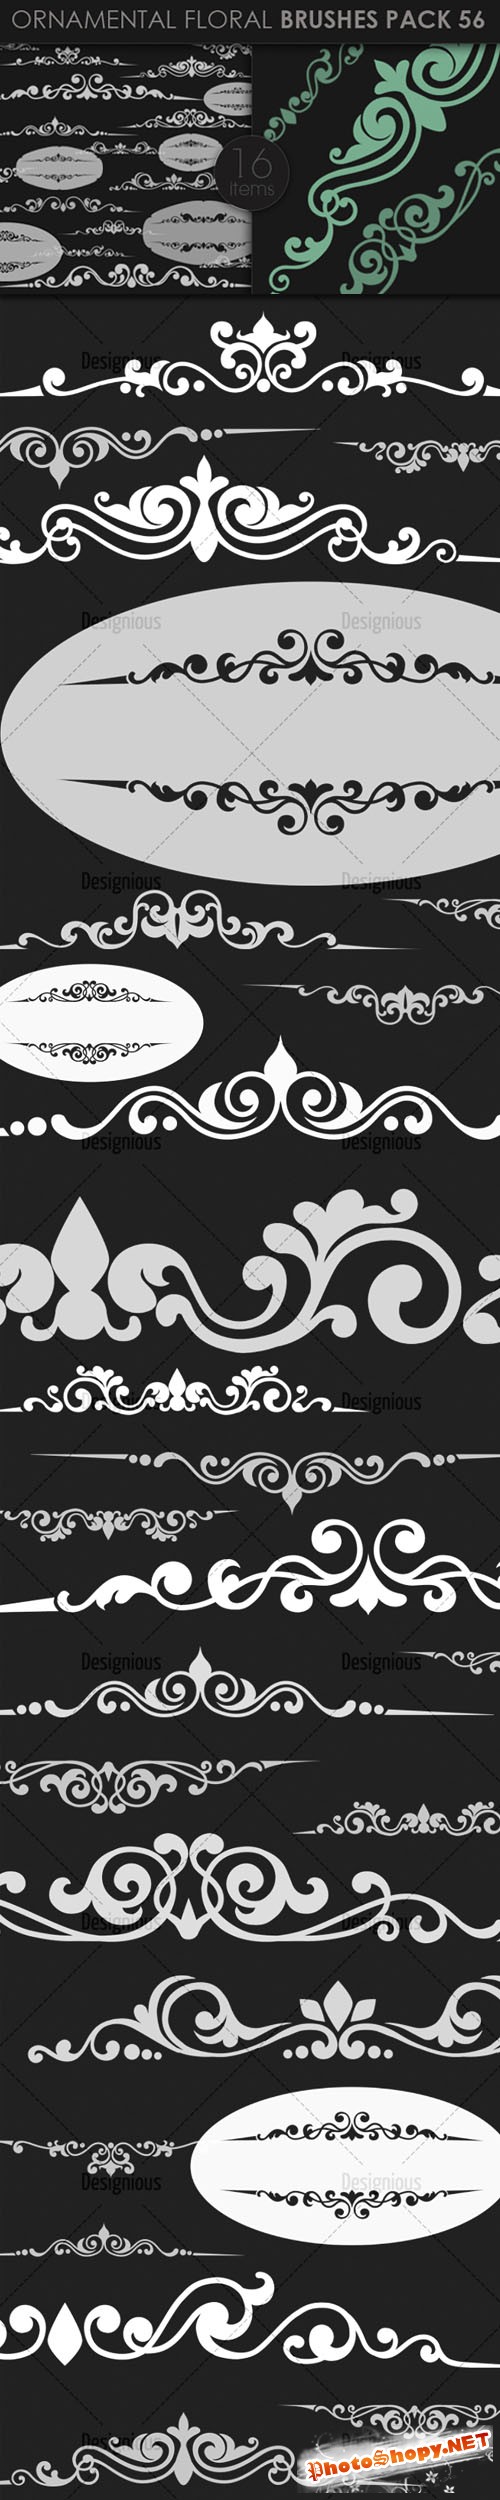 Ornamental Floral Photoshop Brushes Pack 56